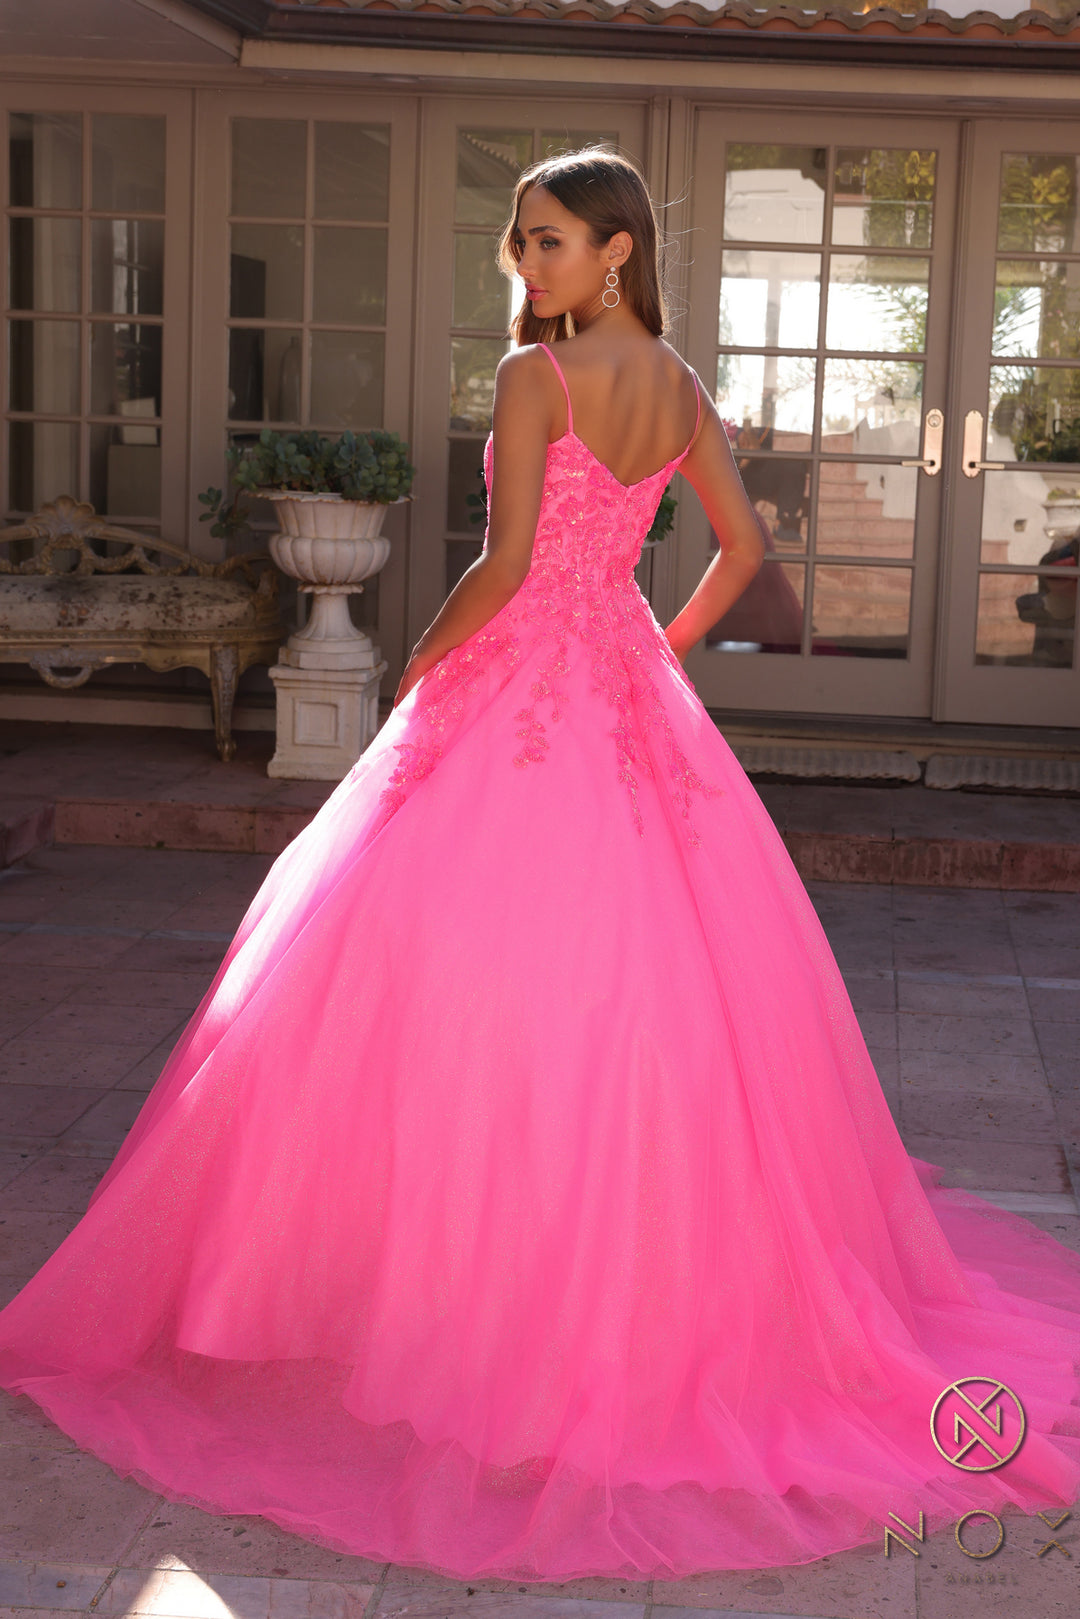 Sequin Applique Sleeveless Ball Gown by Nox Anabel H1464